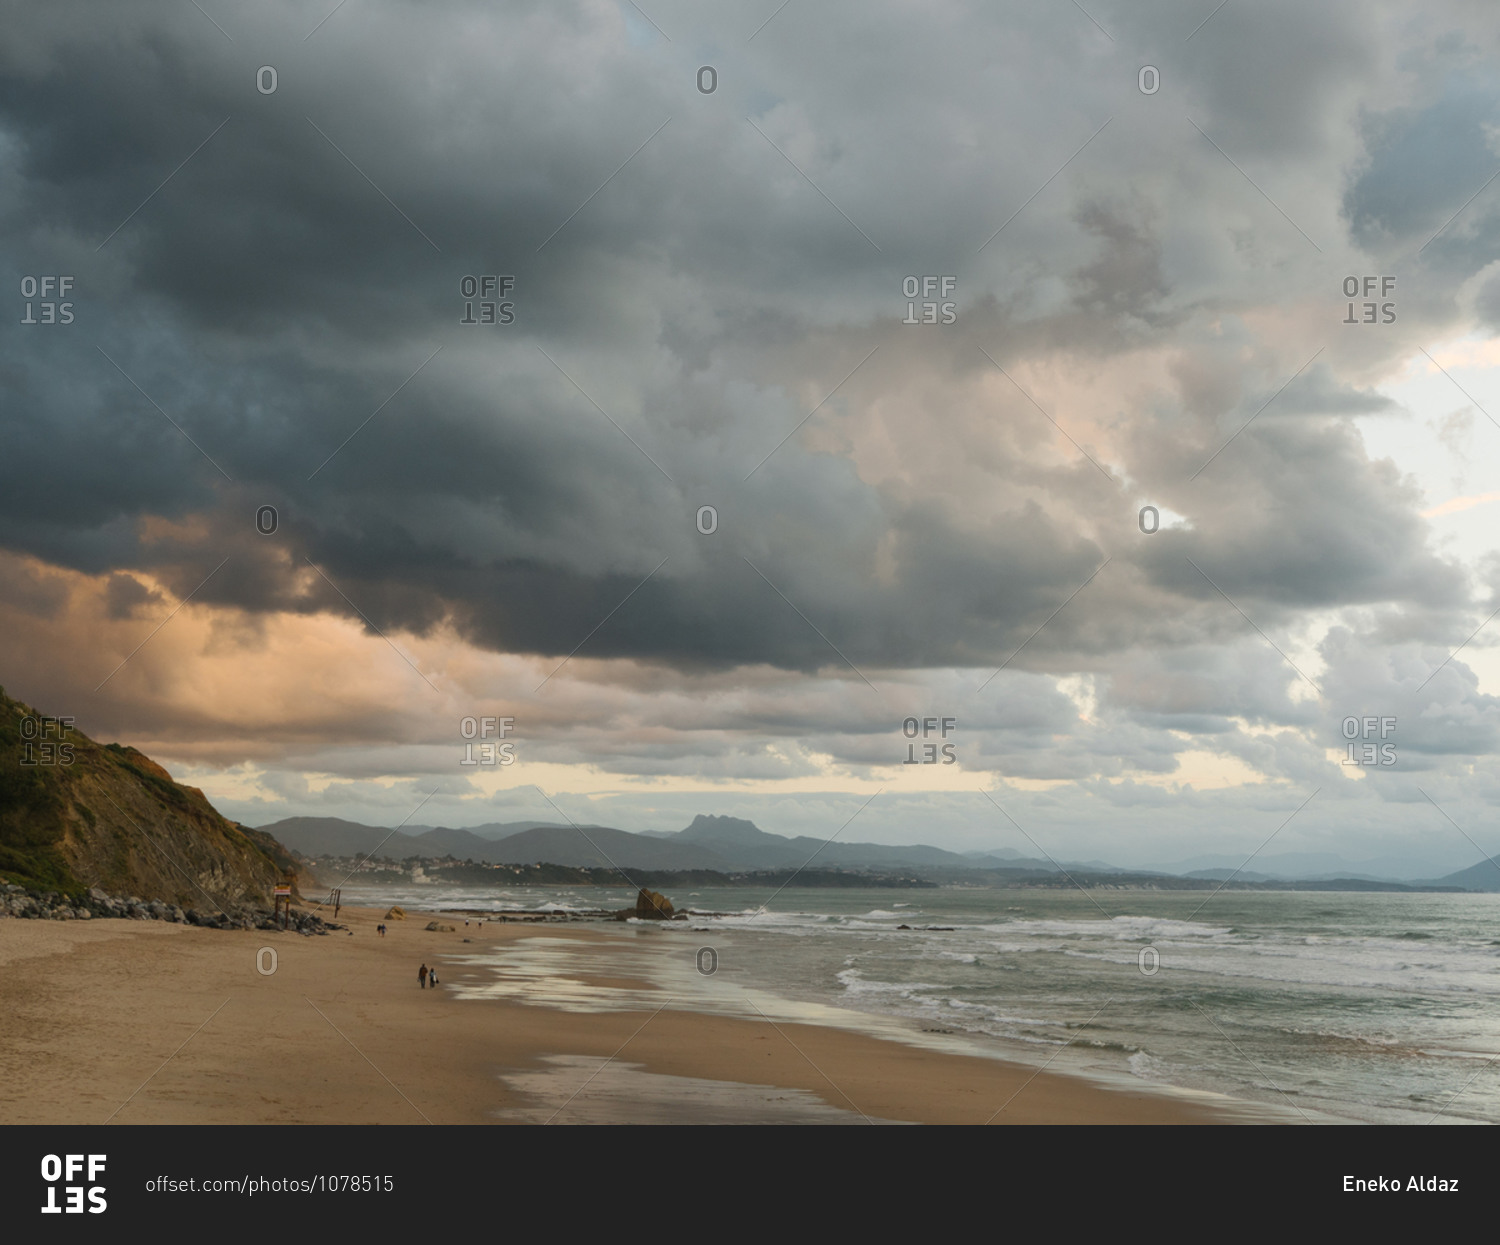 Almost empty beach in Biarritz with dark and epic sky in background